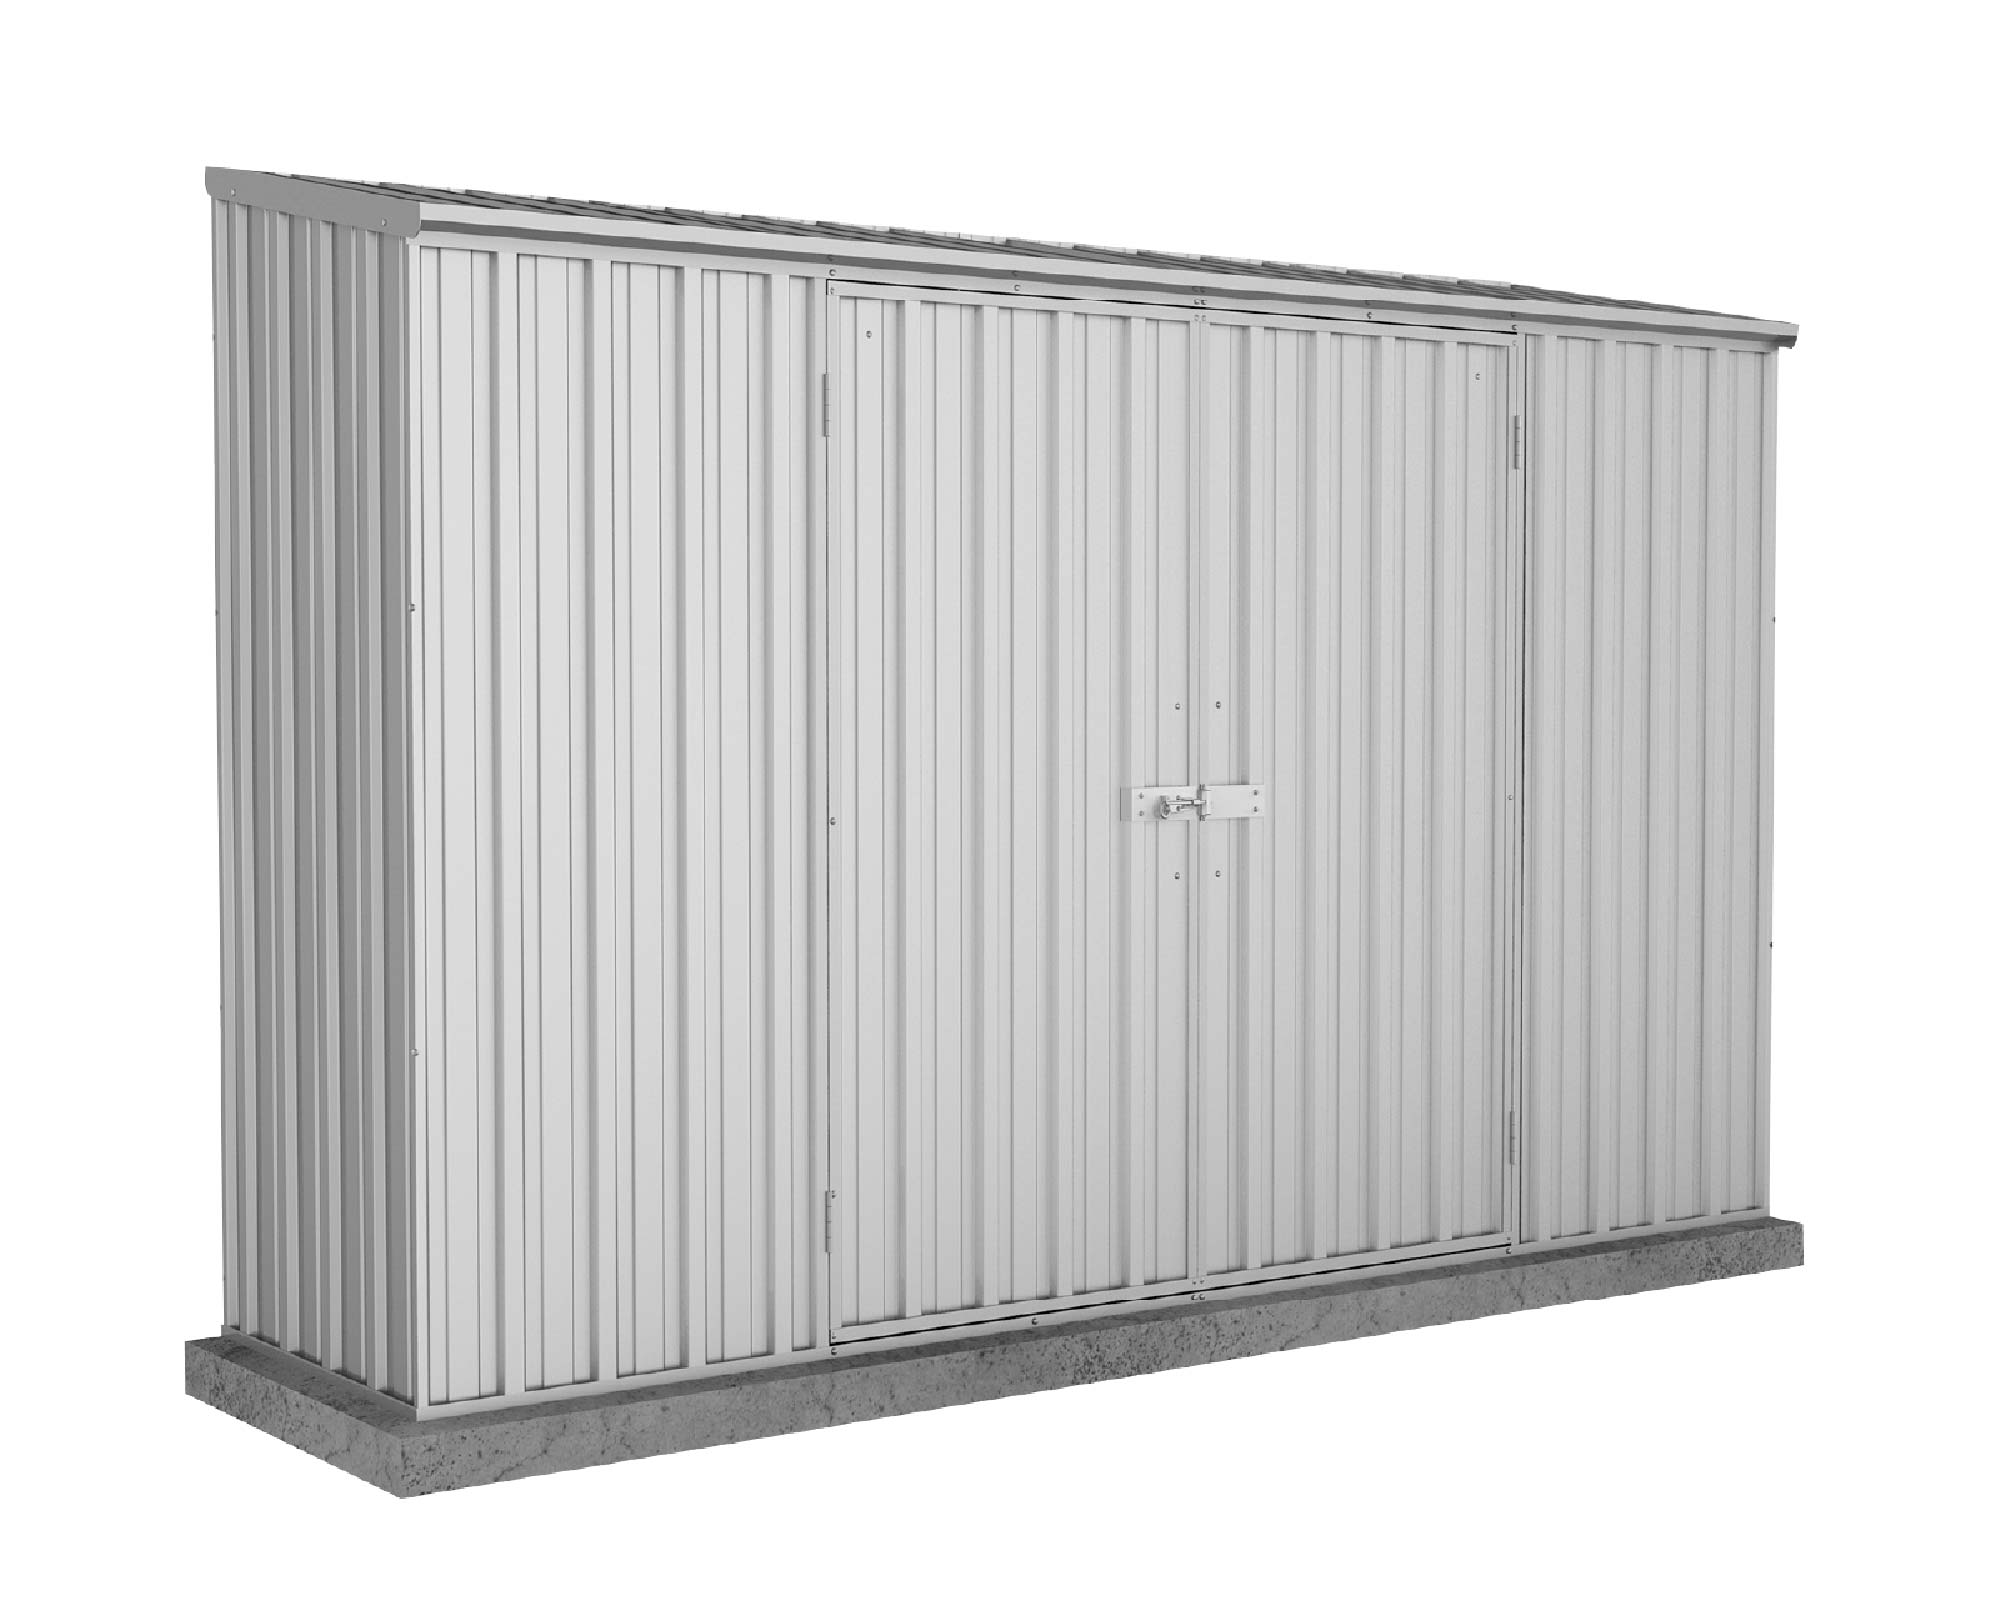 Economy Space Saver Shed 300cm wide  x 78cm deep  x 195cm tall in Zincalume© - ABSCO